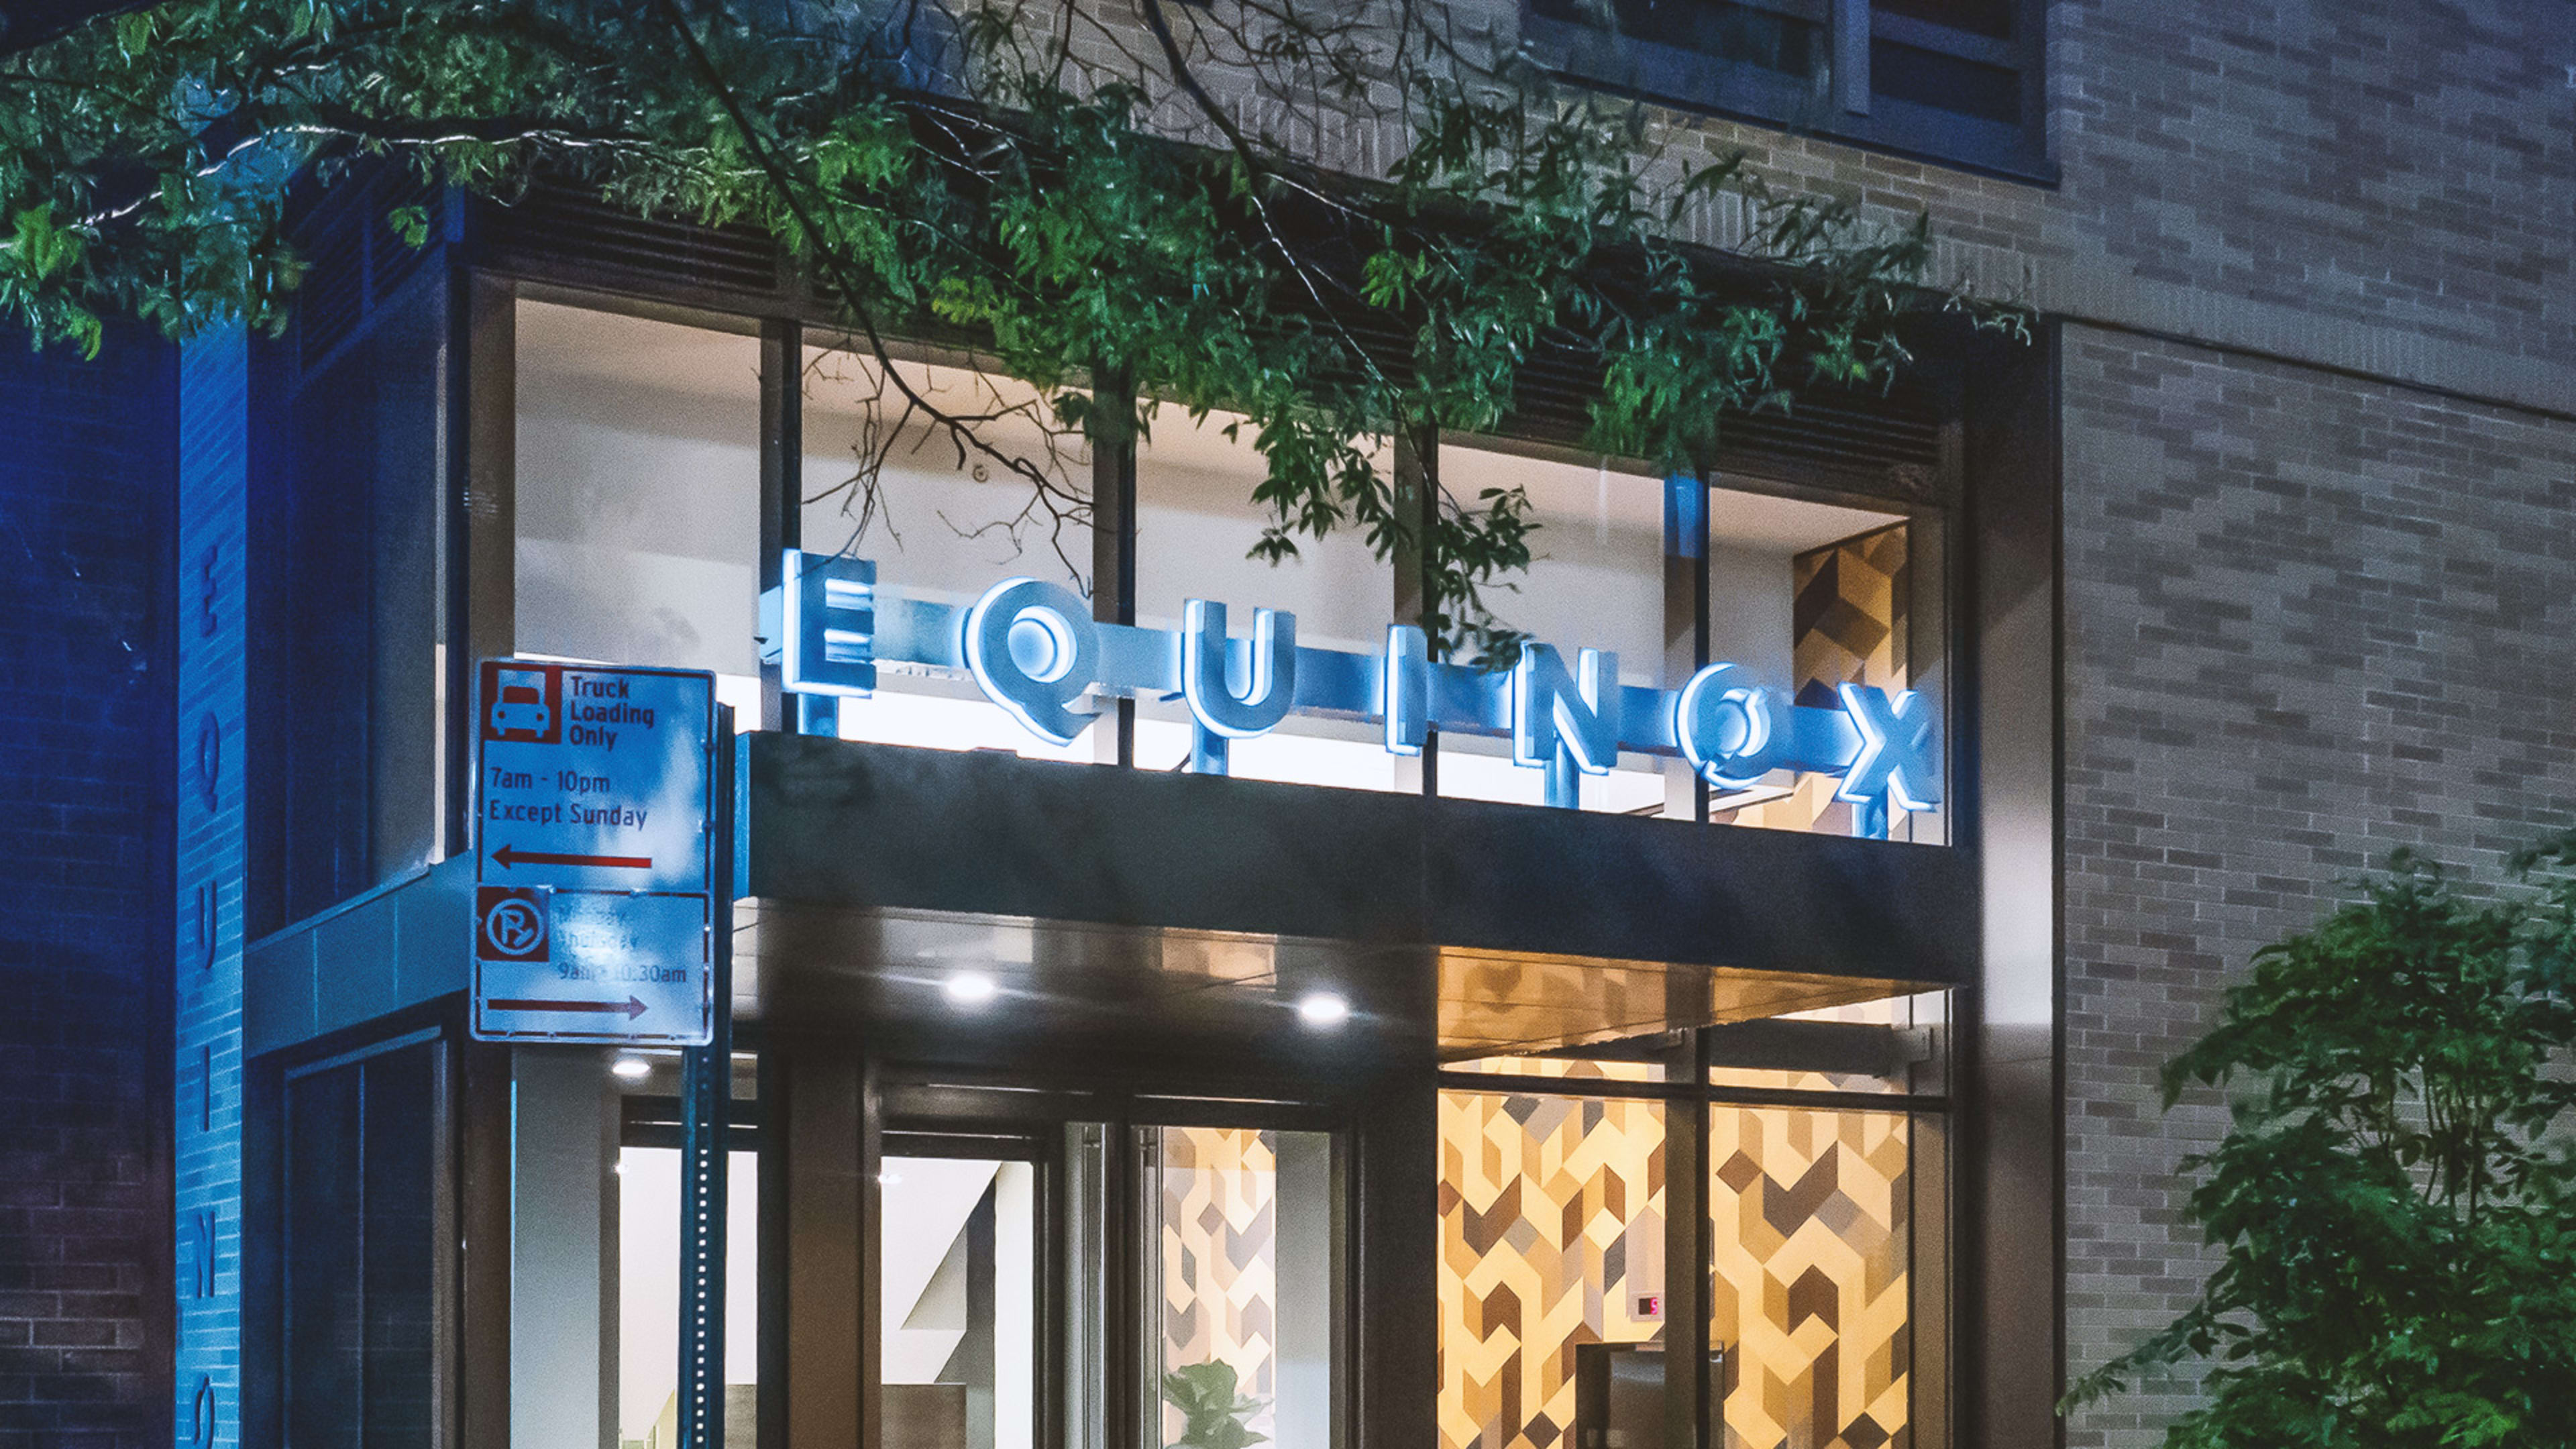 Why the backlash against Equinox? Perhaps because Stephen Ross is such a rarity